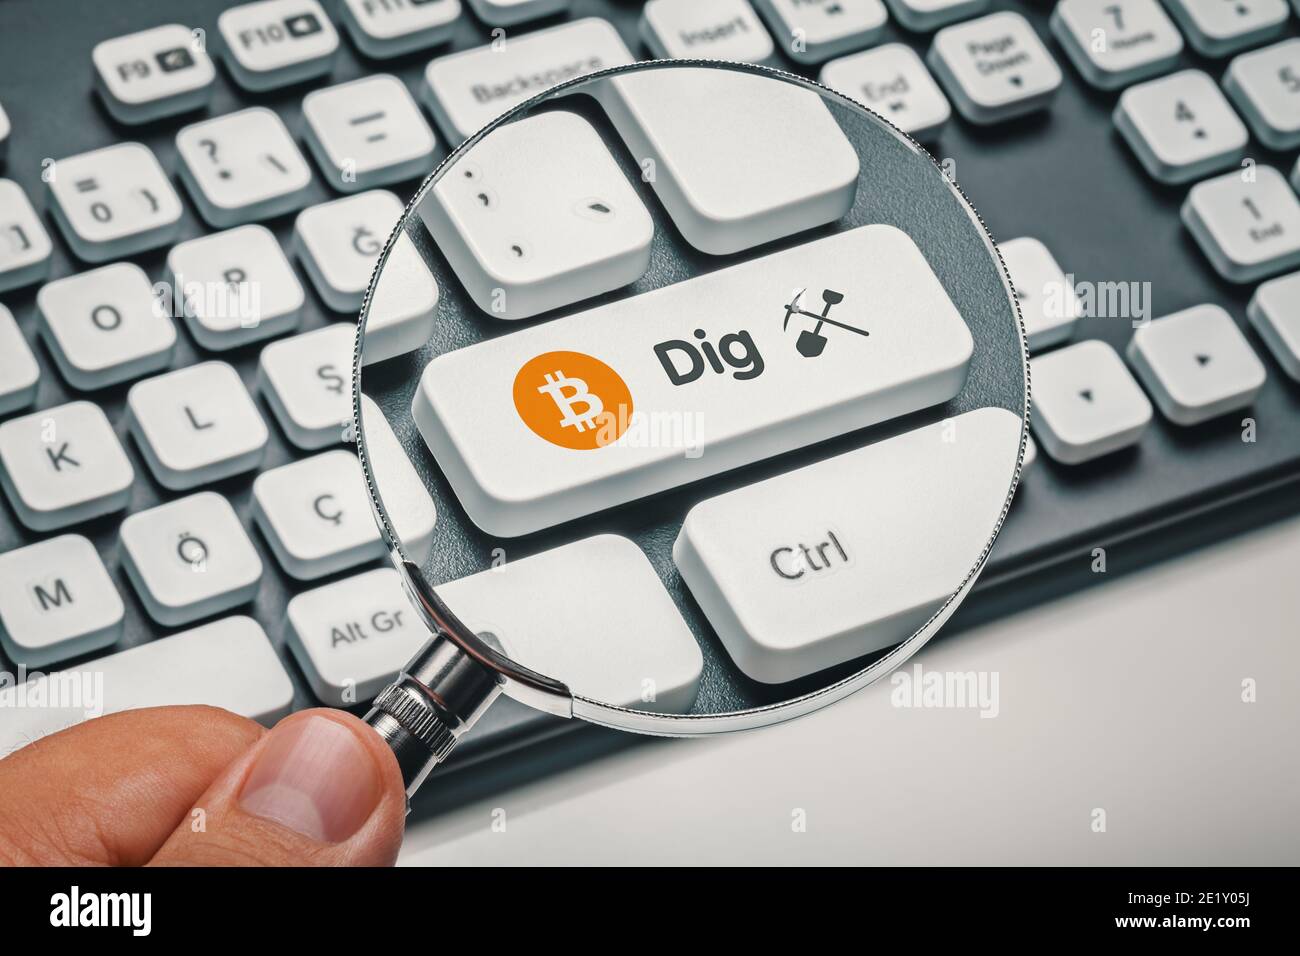 magnifying glass in hand focused on computer key with bitcoin symbol and dig word with symbol Stock Photo